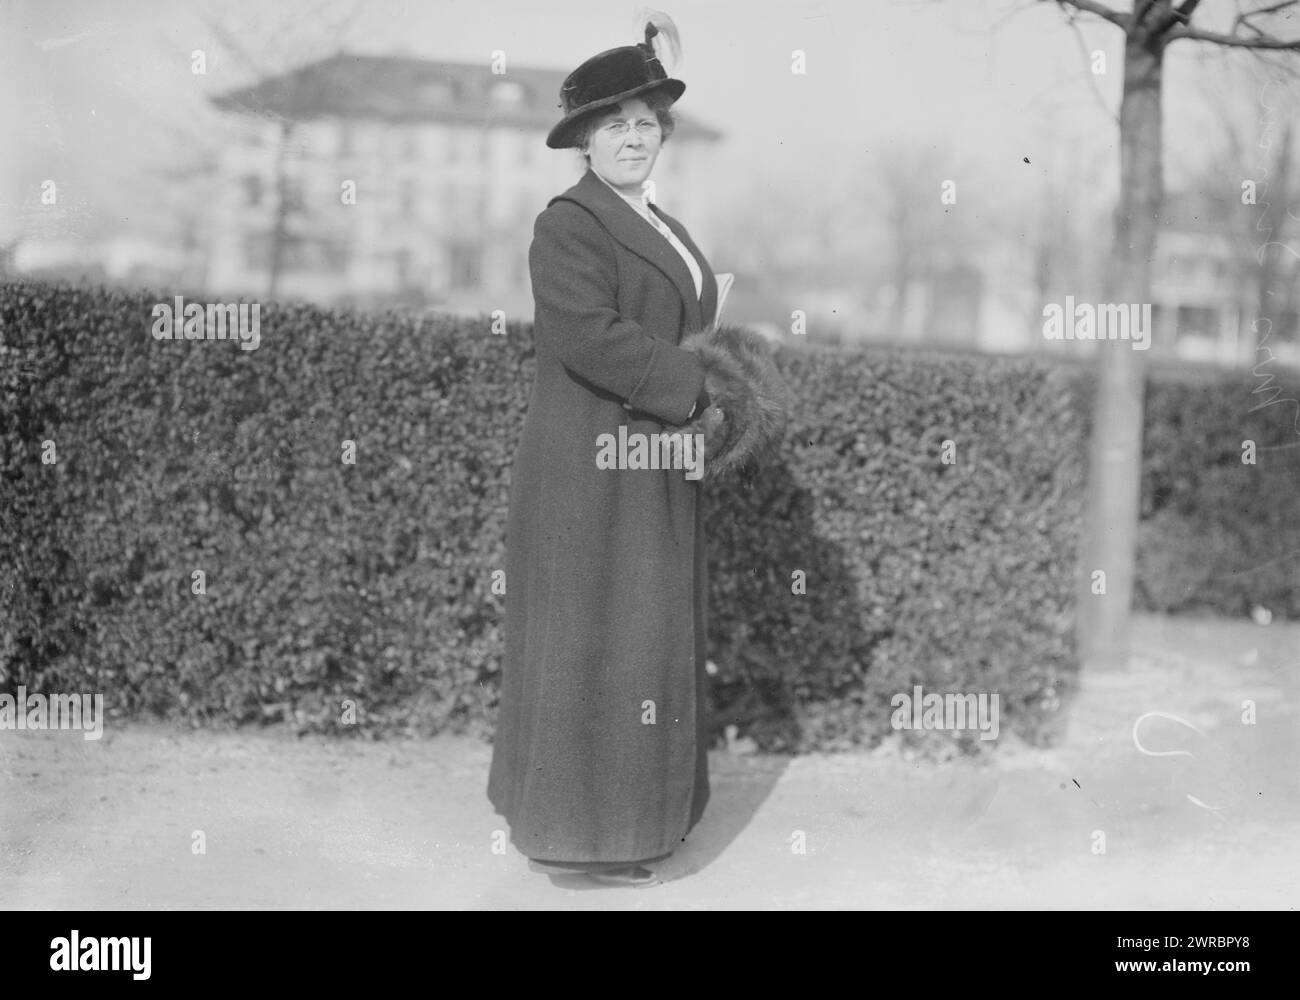 Mrs. Simon, Photograph probably shows Miss Elizabeth Simon, a cook in the Tatum household, who testified in a society divorce case involving Jack Ottman, cotton broker John C. Tatum (d. 1916) and Mrs. Mary Jane Tatum, of Great Neck Long Islan, in January 1915., 1915, Glass negatives, 1 negative: glass Stock Photo